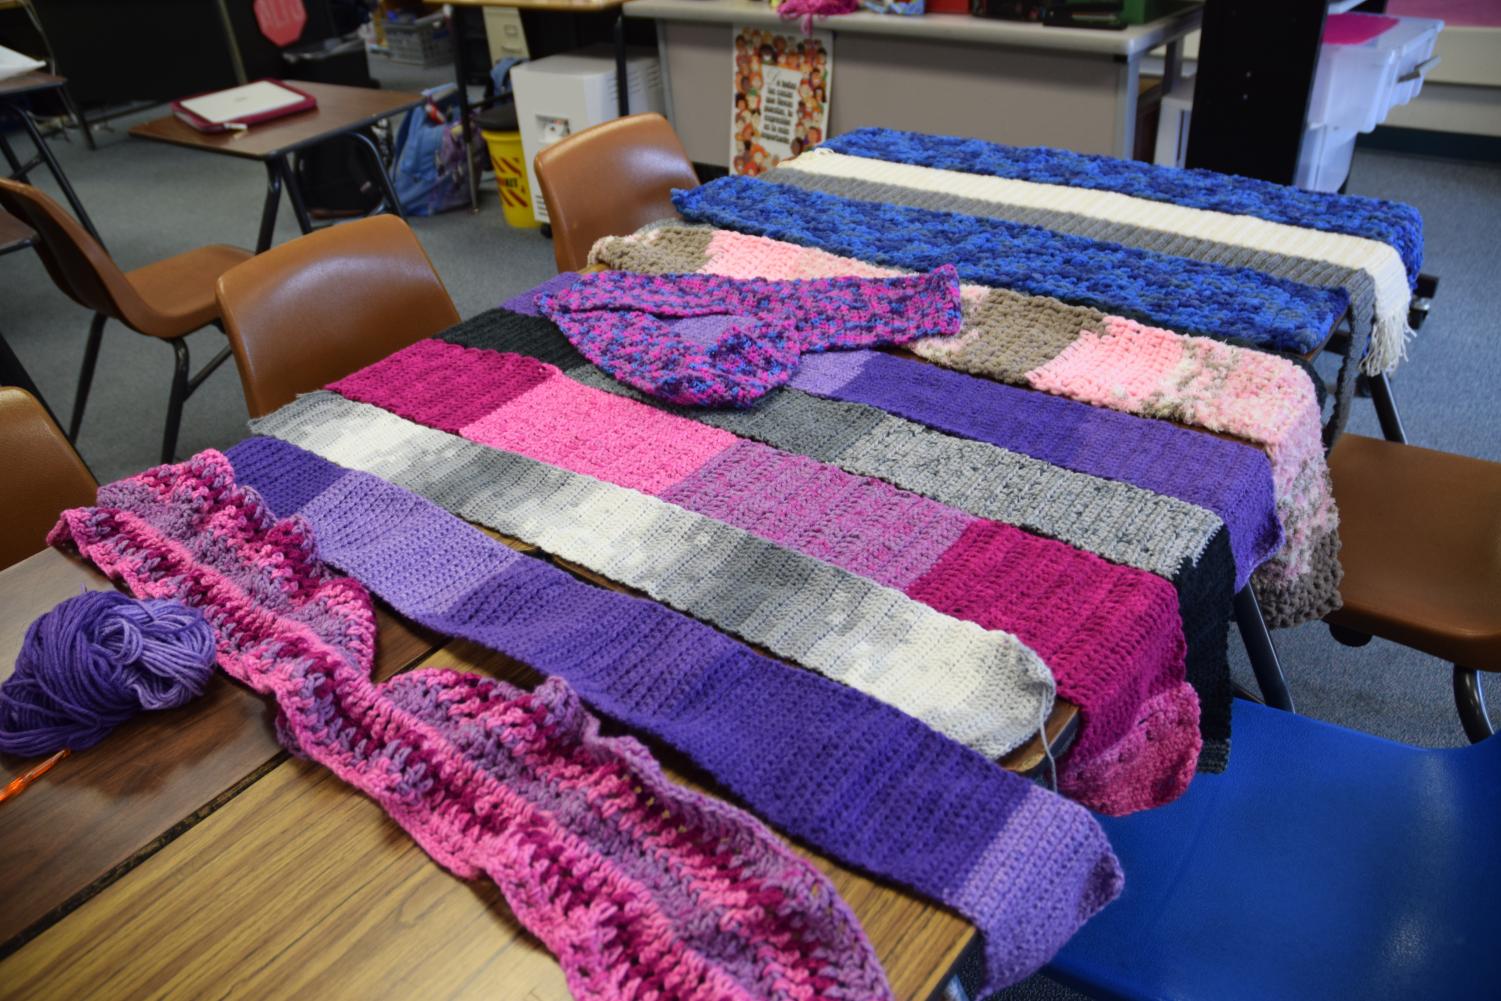 Knitting+for+a+cause%3A+Amador+Crochet+and+Knitting+Club+craft+scarves+for+charity